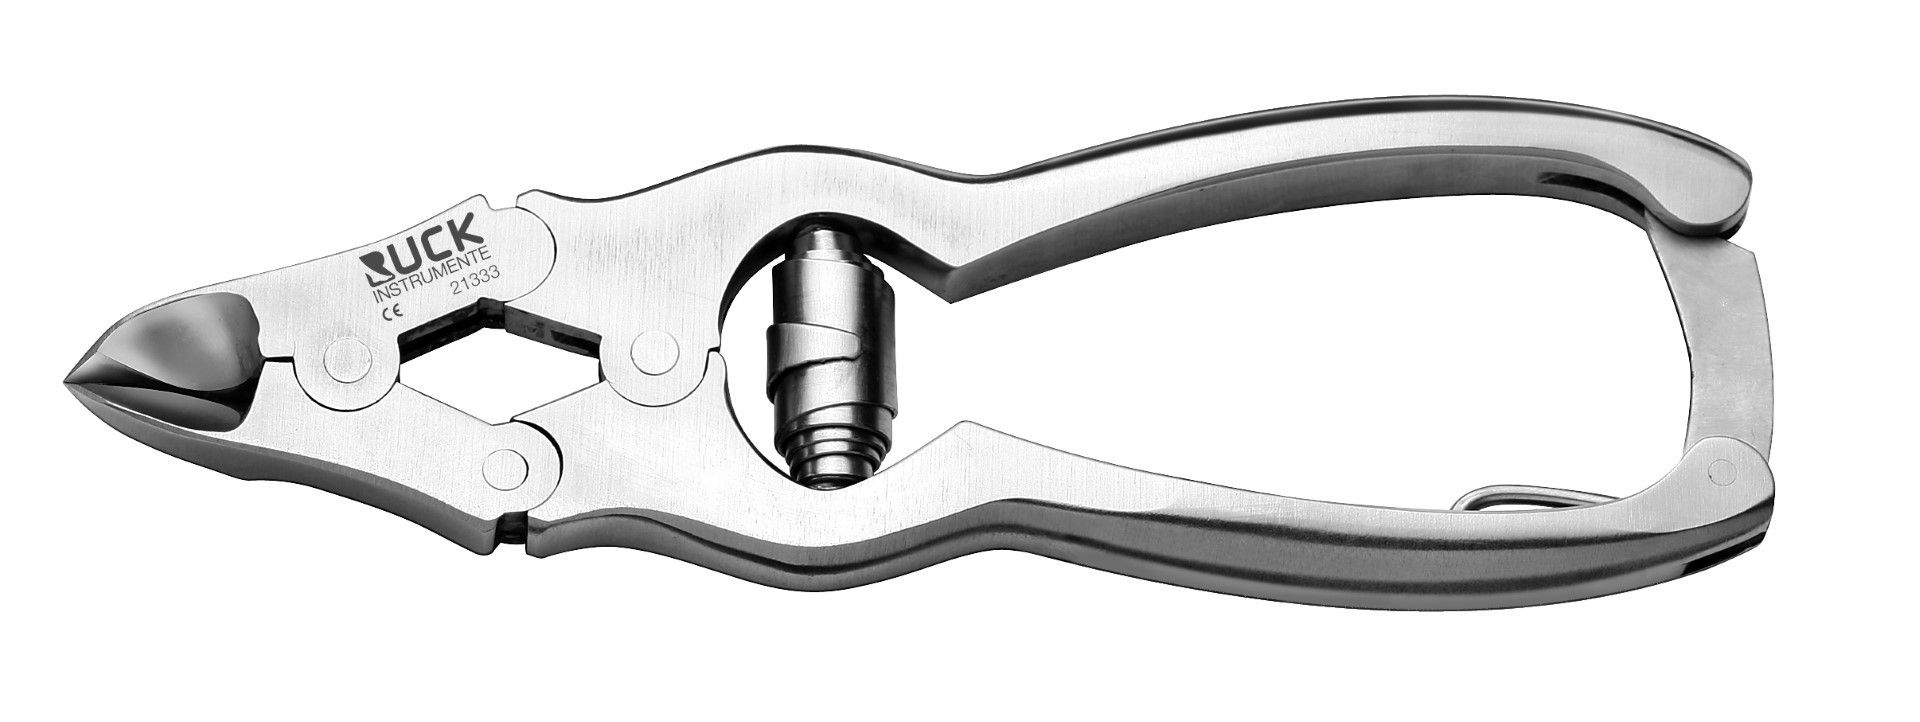 RUCK INSTRUMENTS NAIL NIPPER WITH DOUBLE TRANSLATION photo